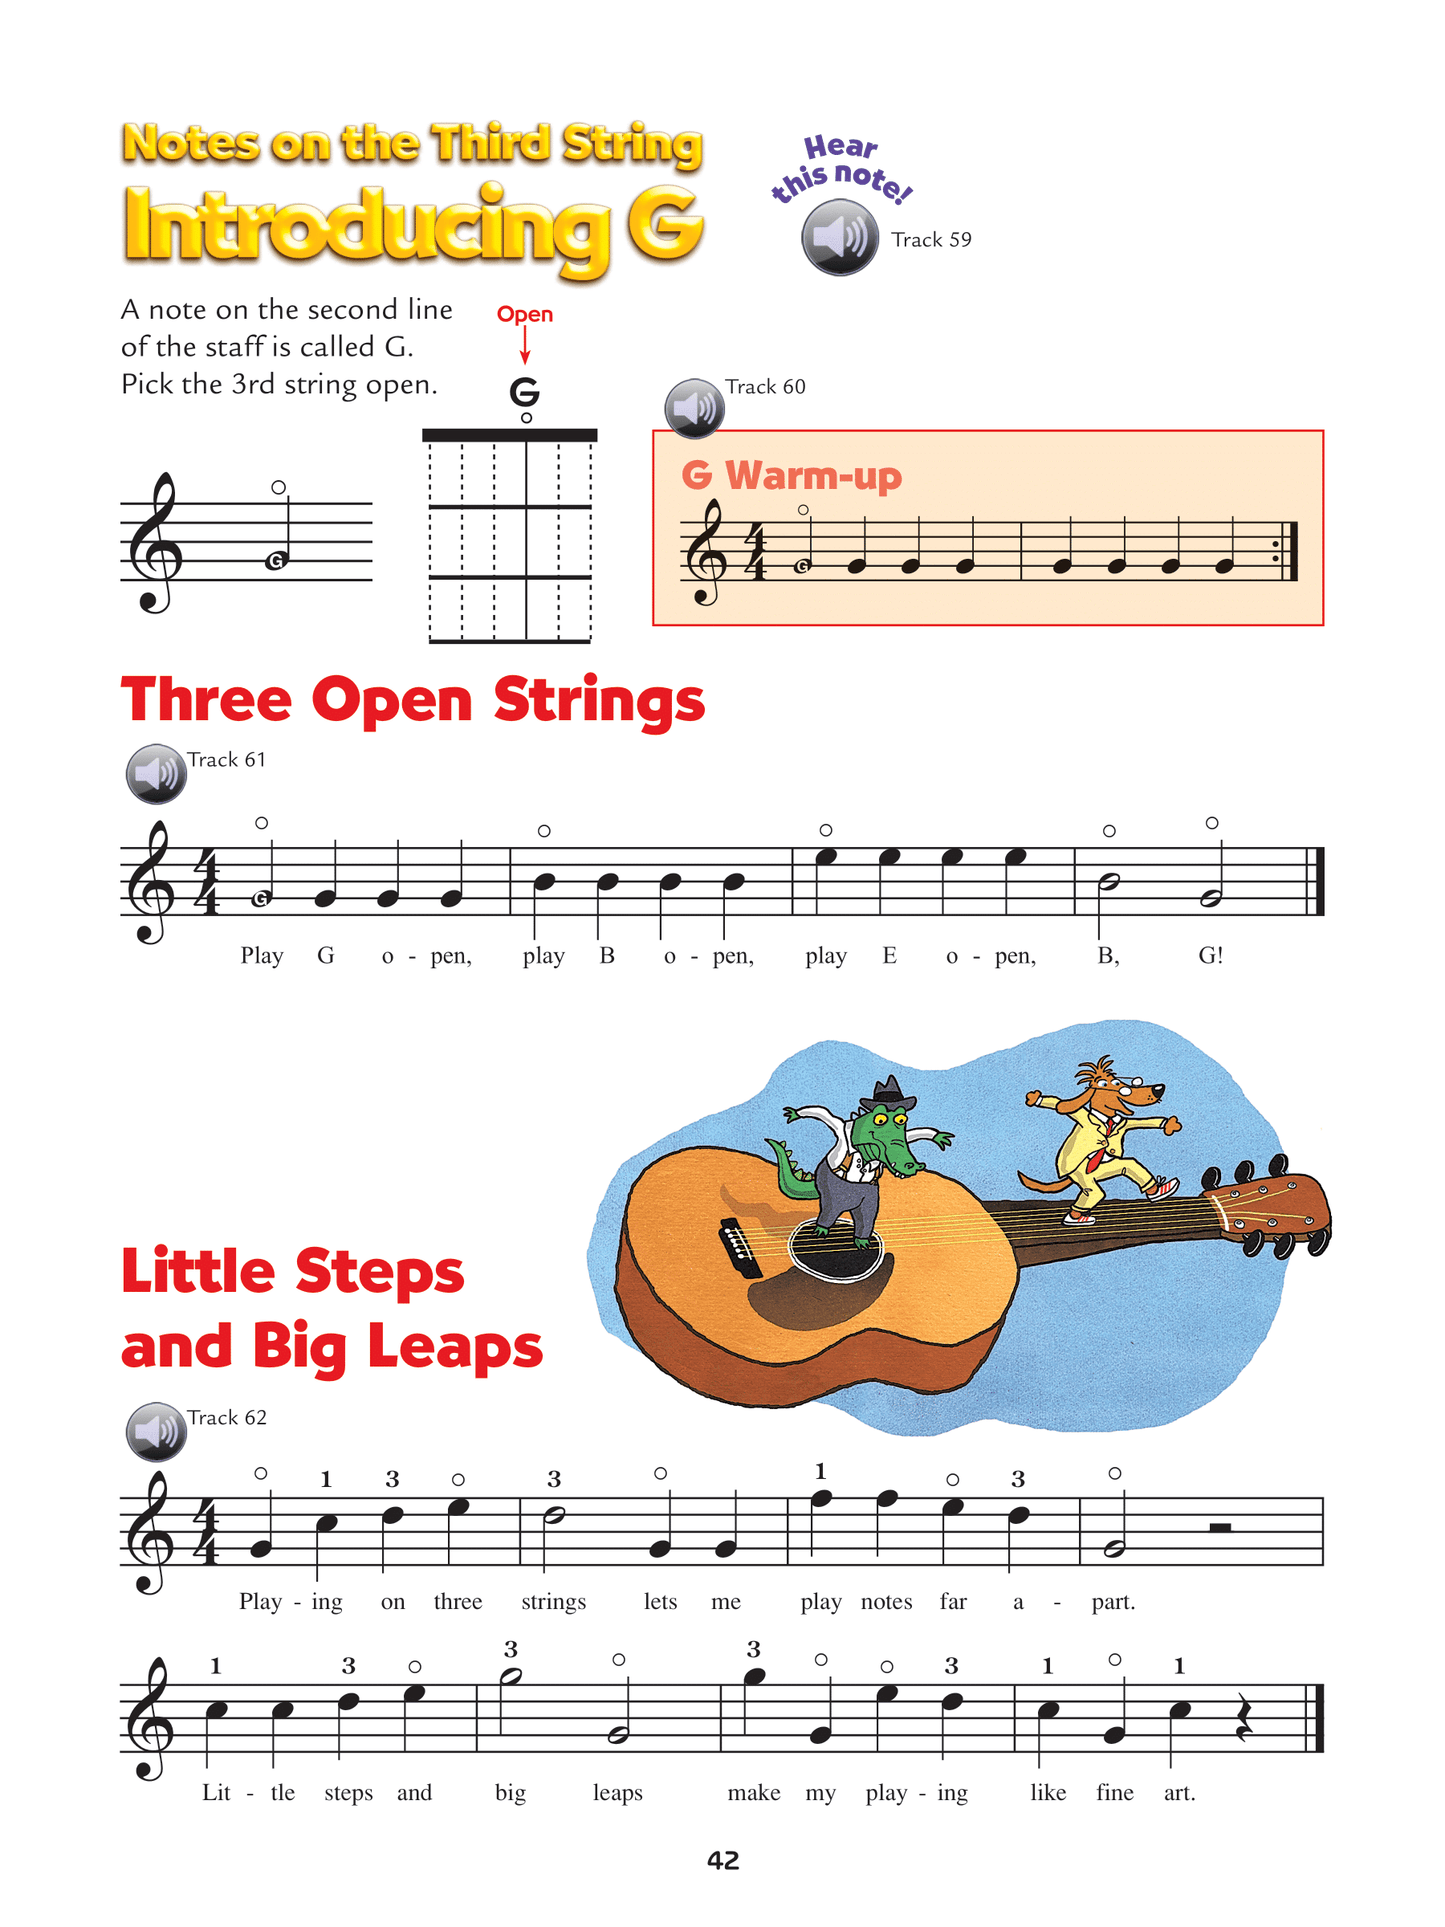 Alfred's Kids Guitar Course 1 - Book/Ola